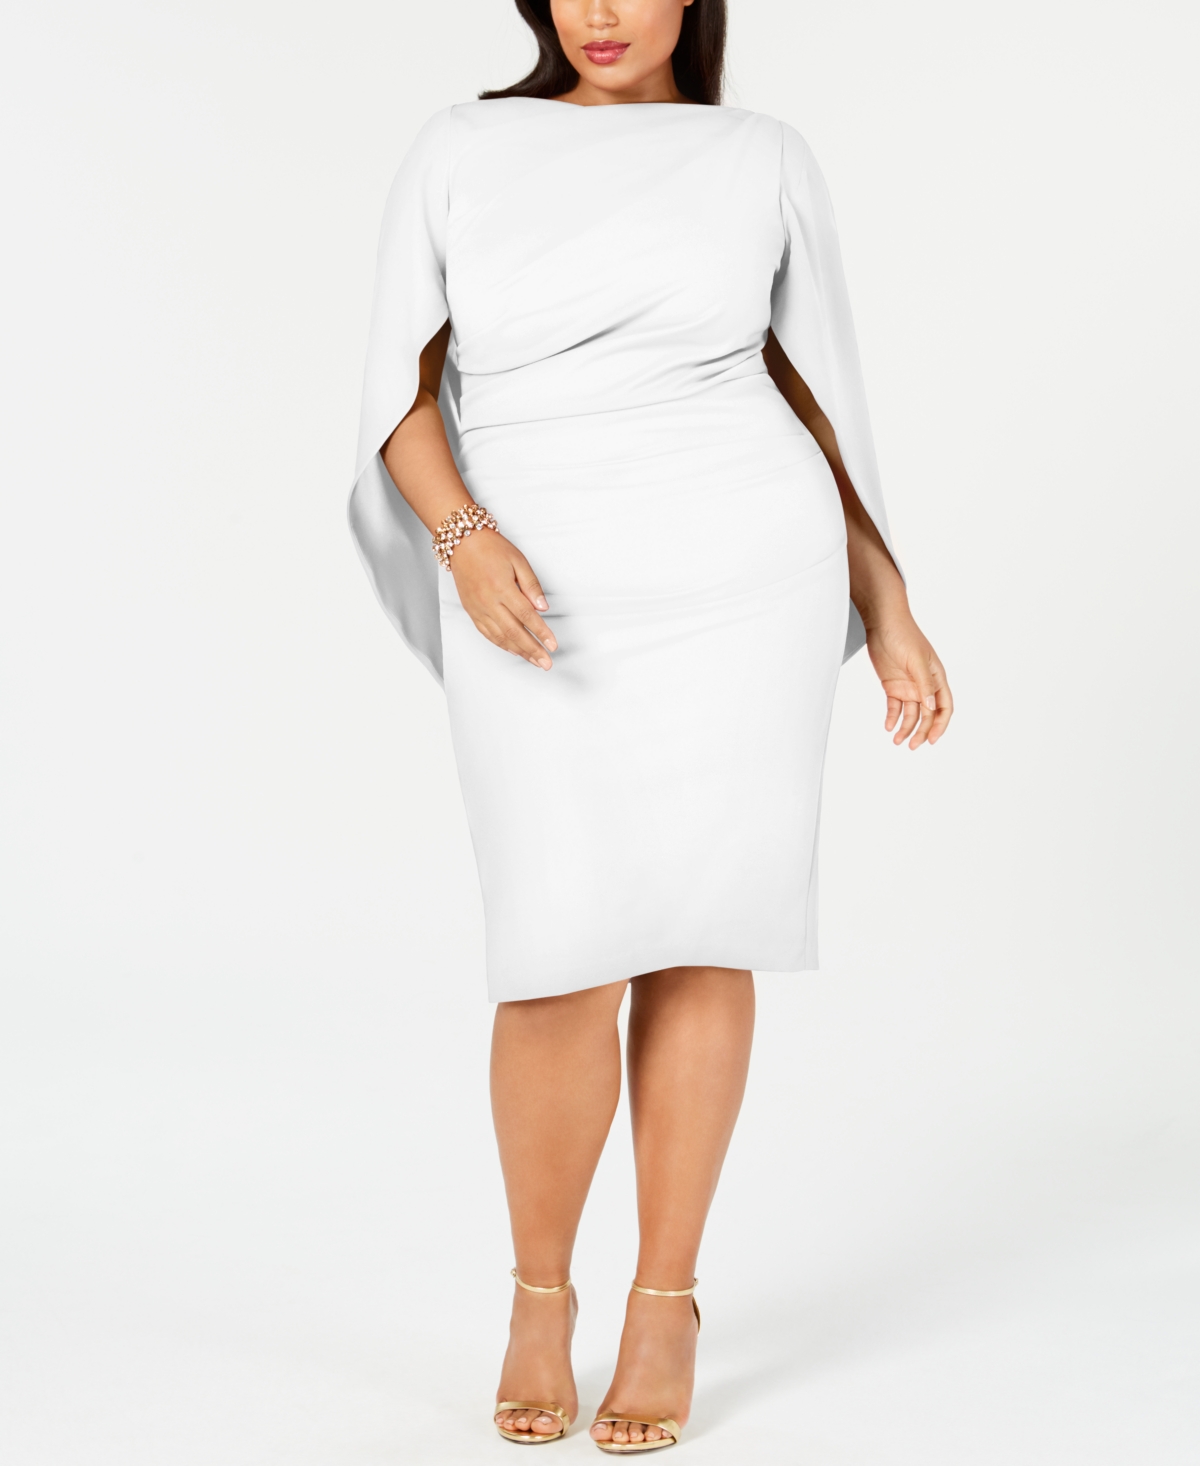 Plus Size Ruched Cape Dress - White